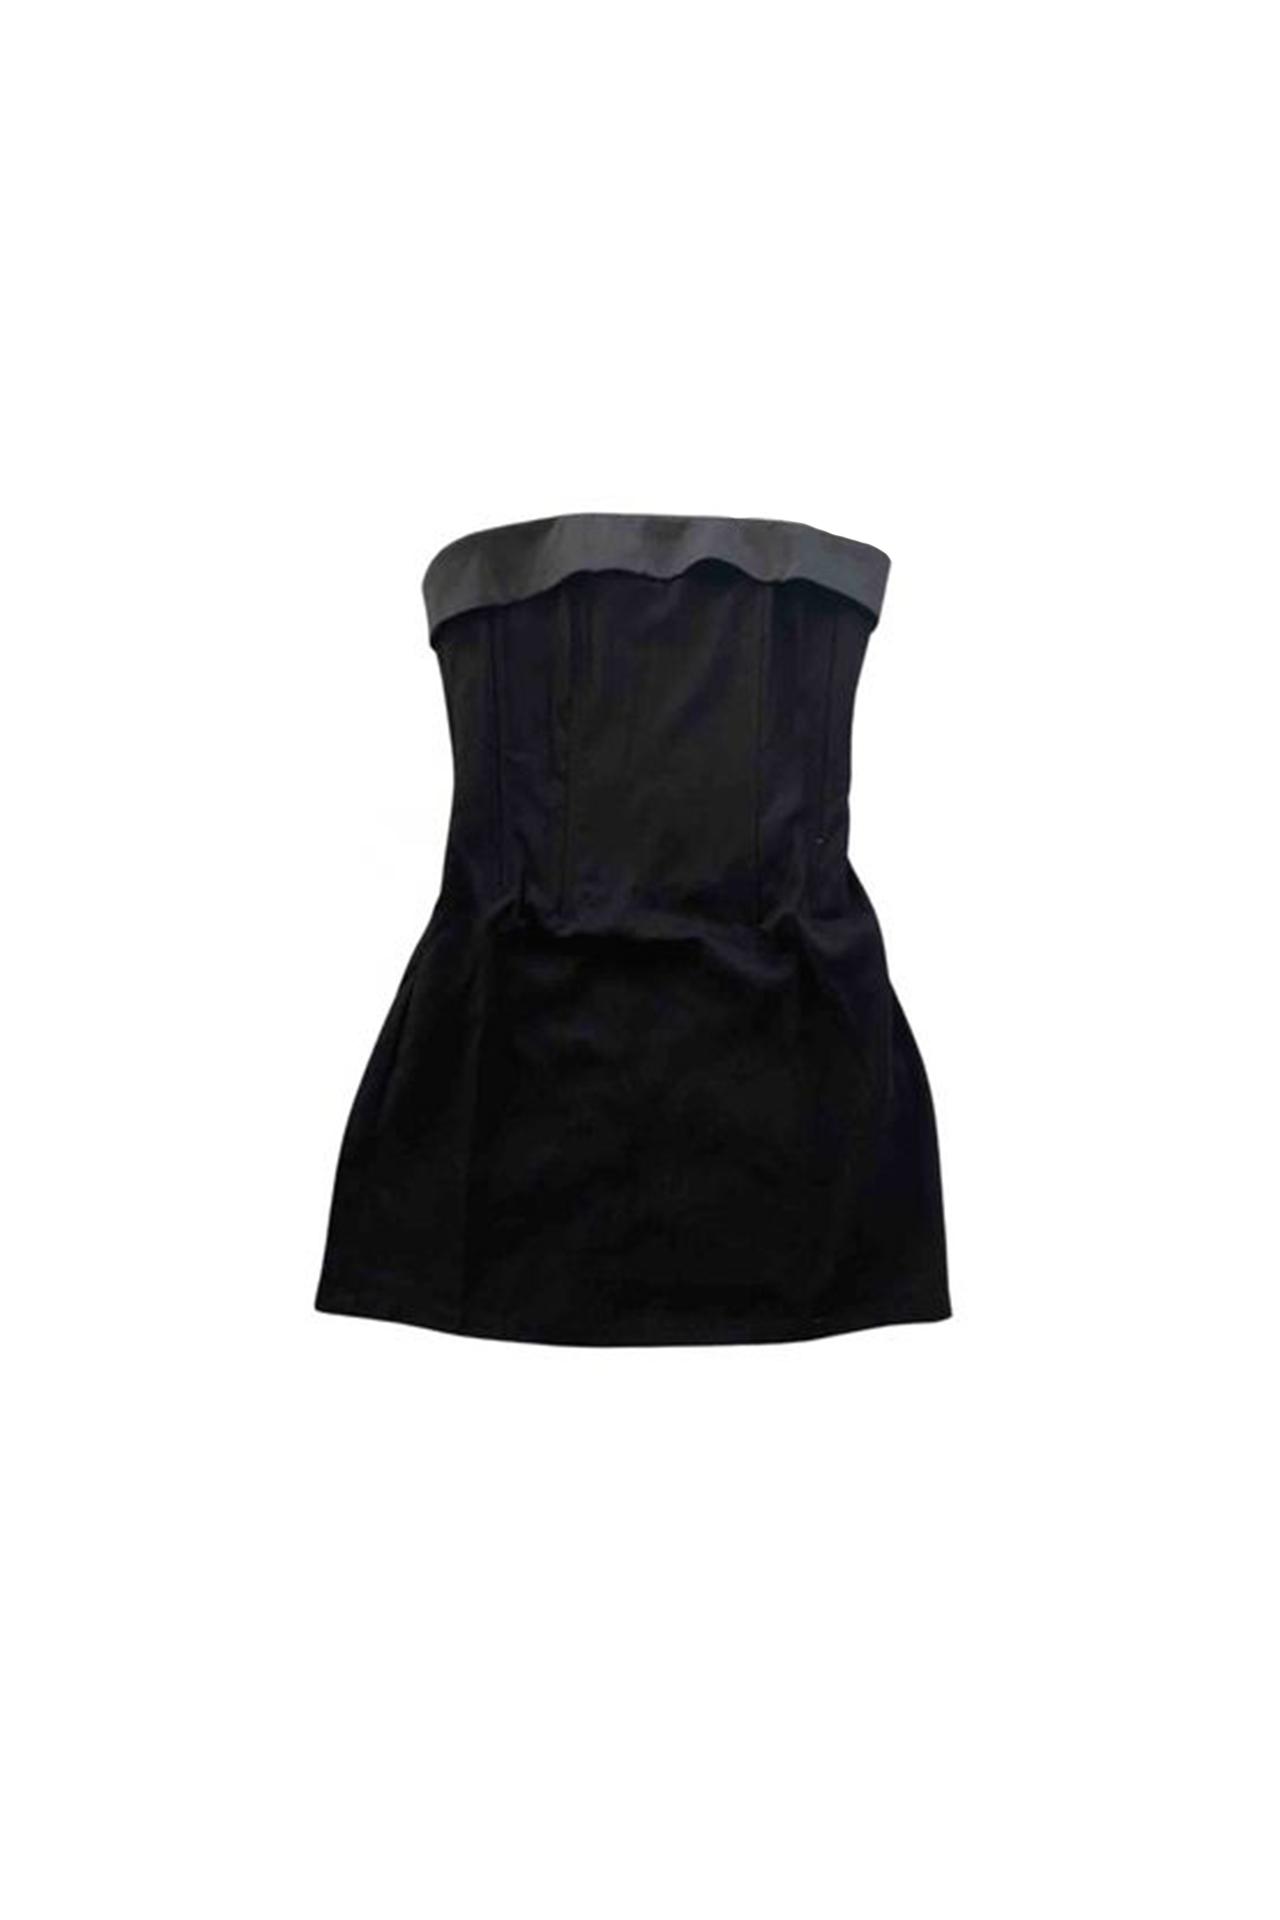 The Little Black Dress: A Style Icon - Vestiaire Collective